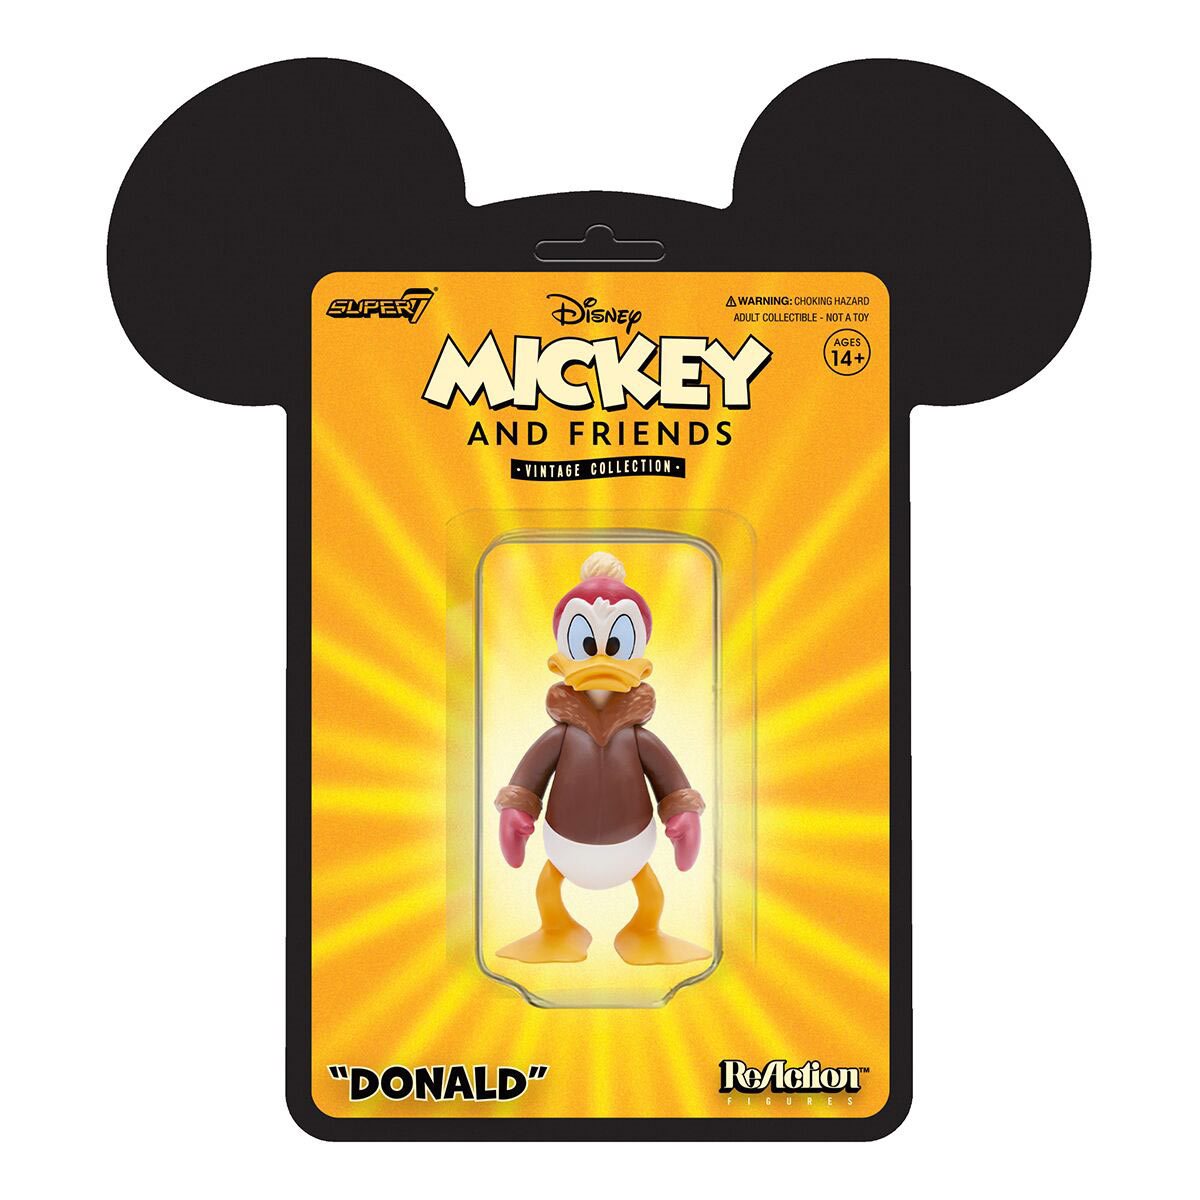 Disney Mickey and Friends Vintage Collection Donald Duck 3 3/4-Inch  ReAction Figure